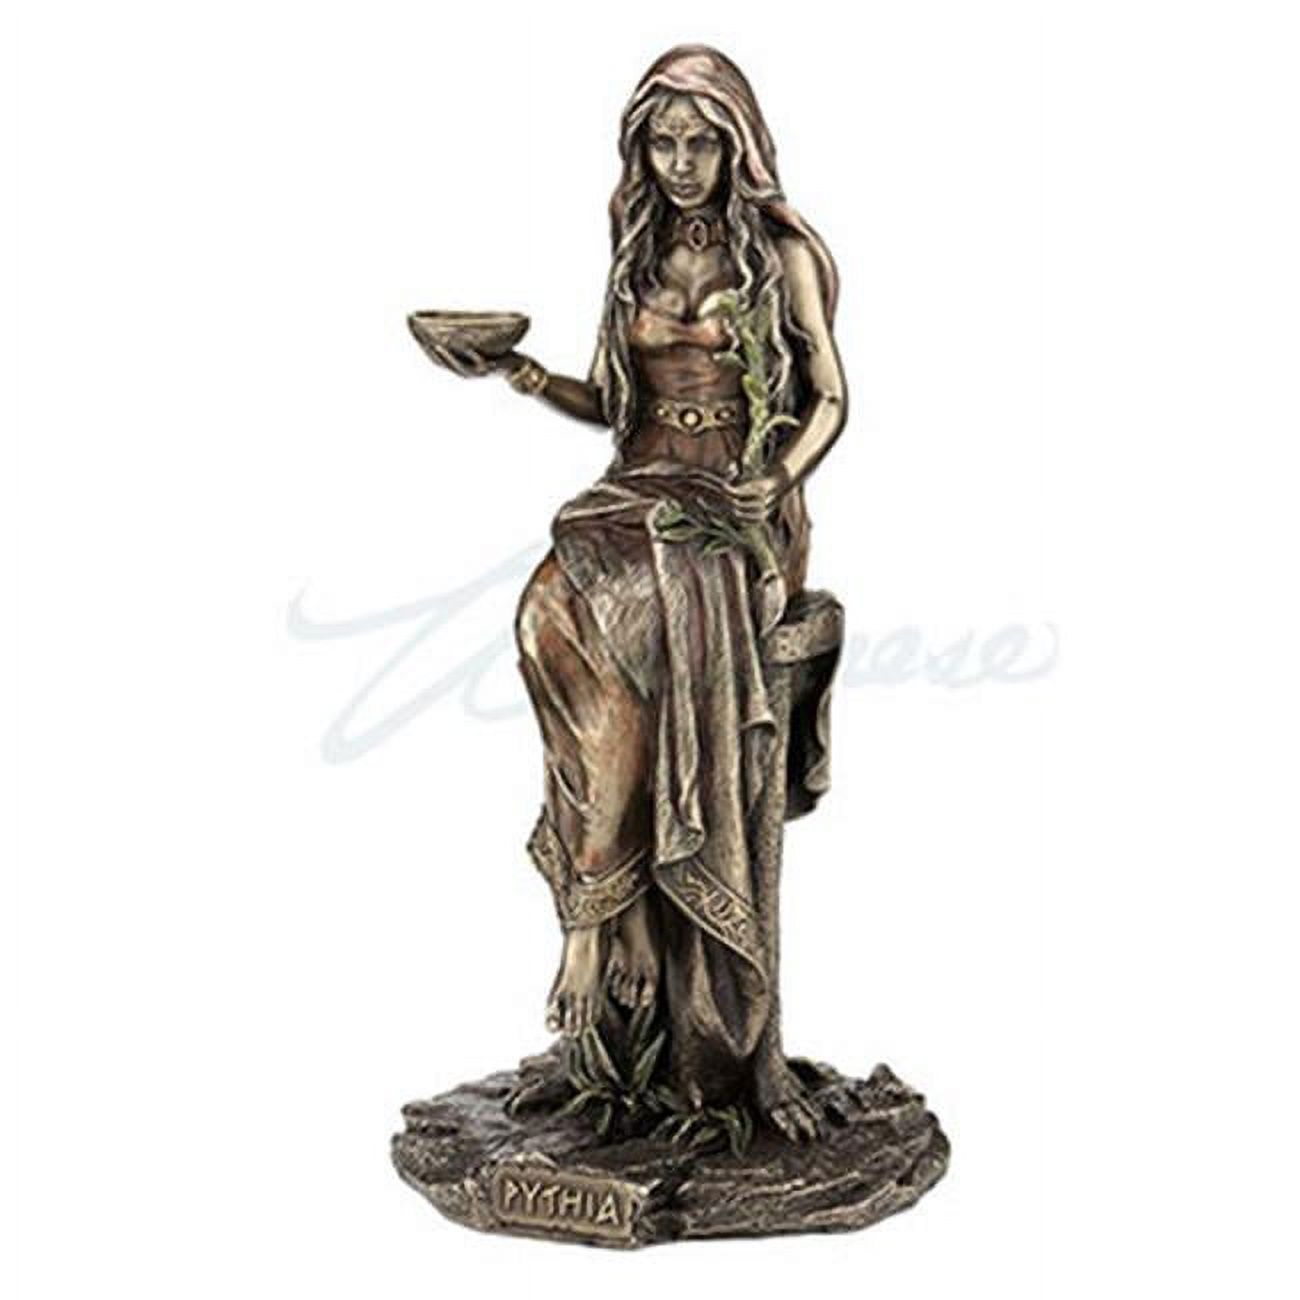 Veronese Design WU76886A4 Pythia the Oracle of Delphi at the Temple of Apollo Sculpture - Bronze - image 1 of 3